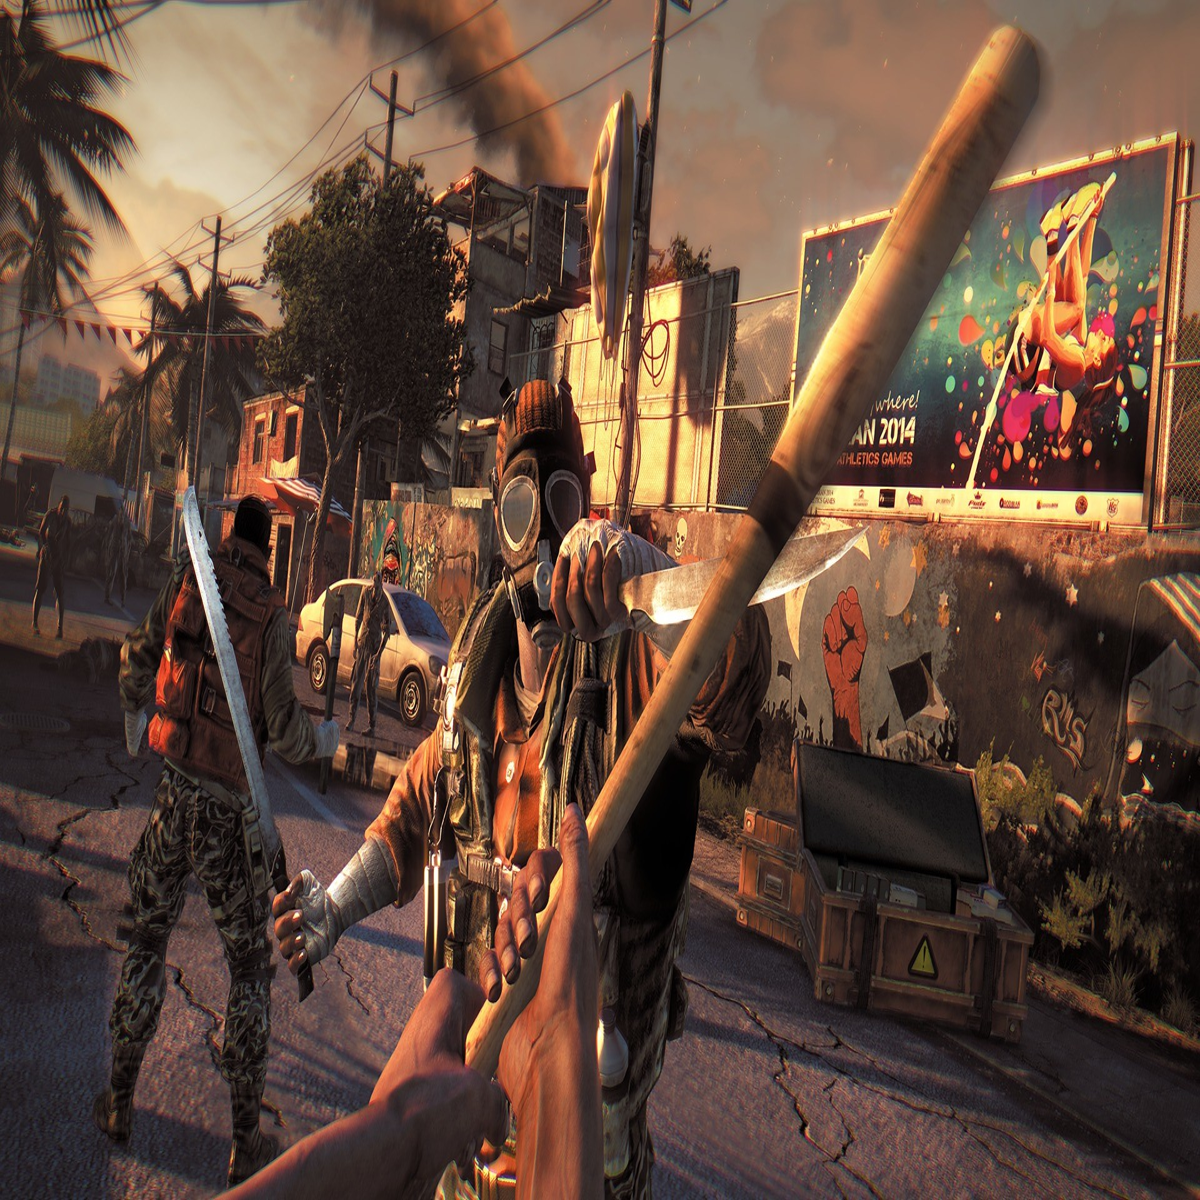 Dying Light Enhanced Edition and shapez are free in the Epic Games